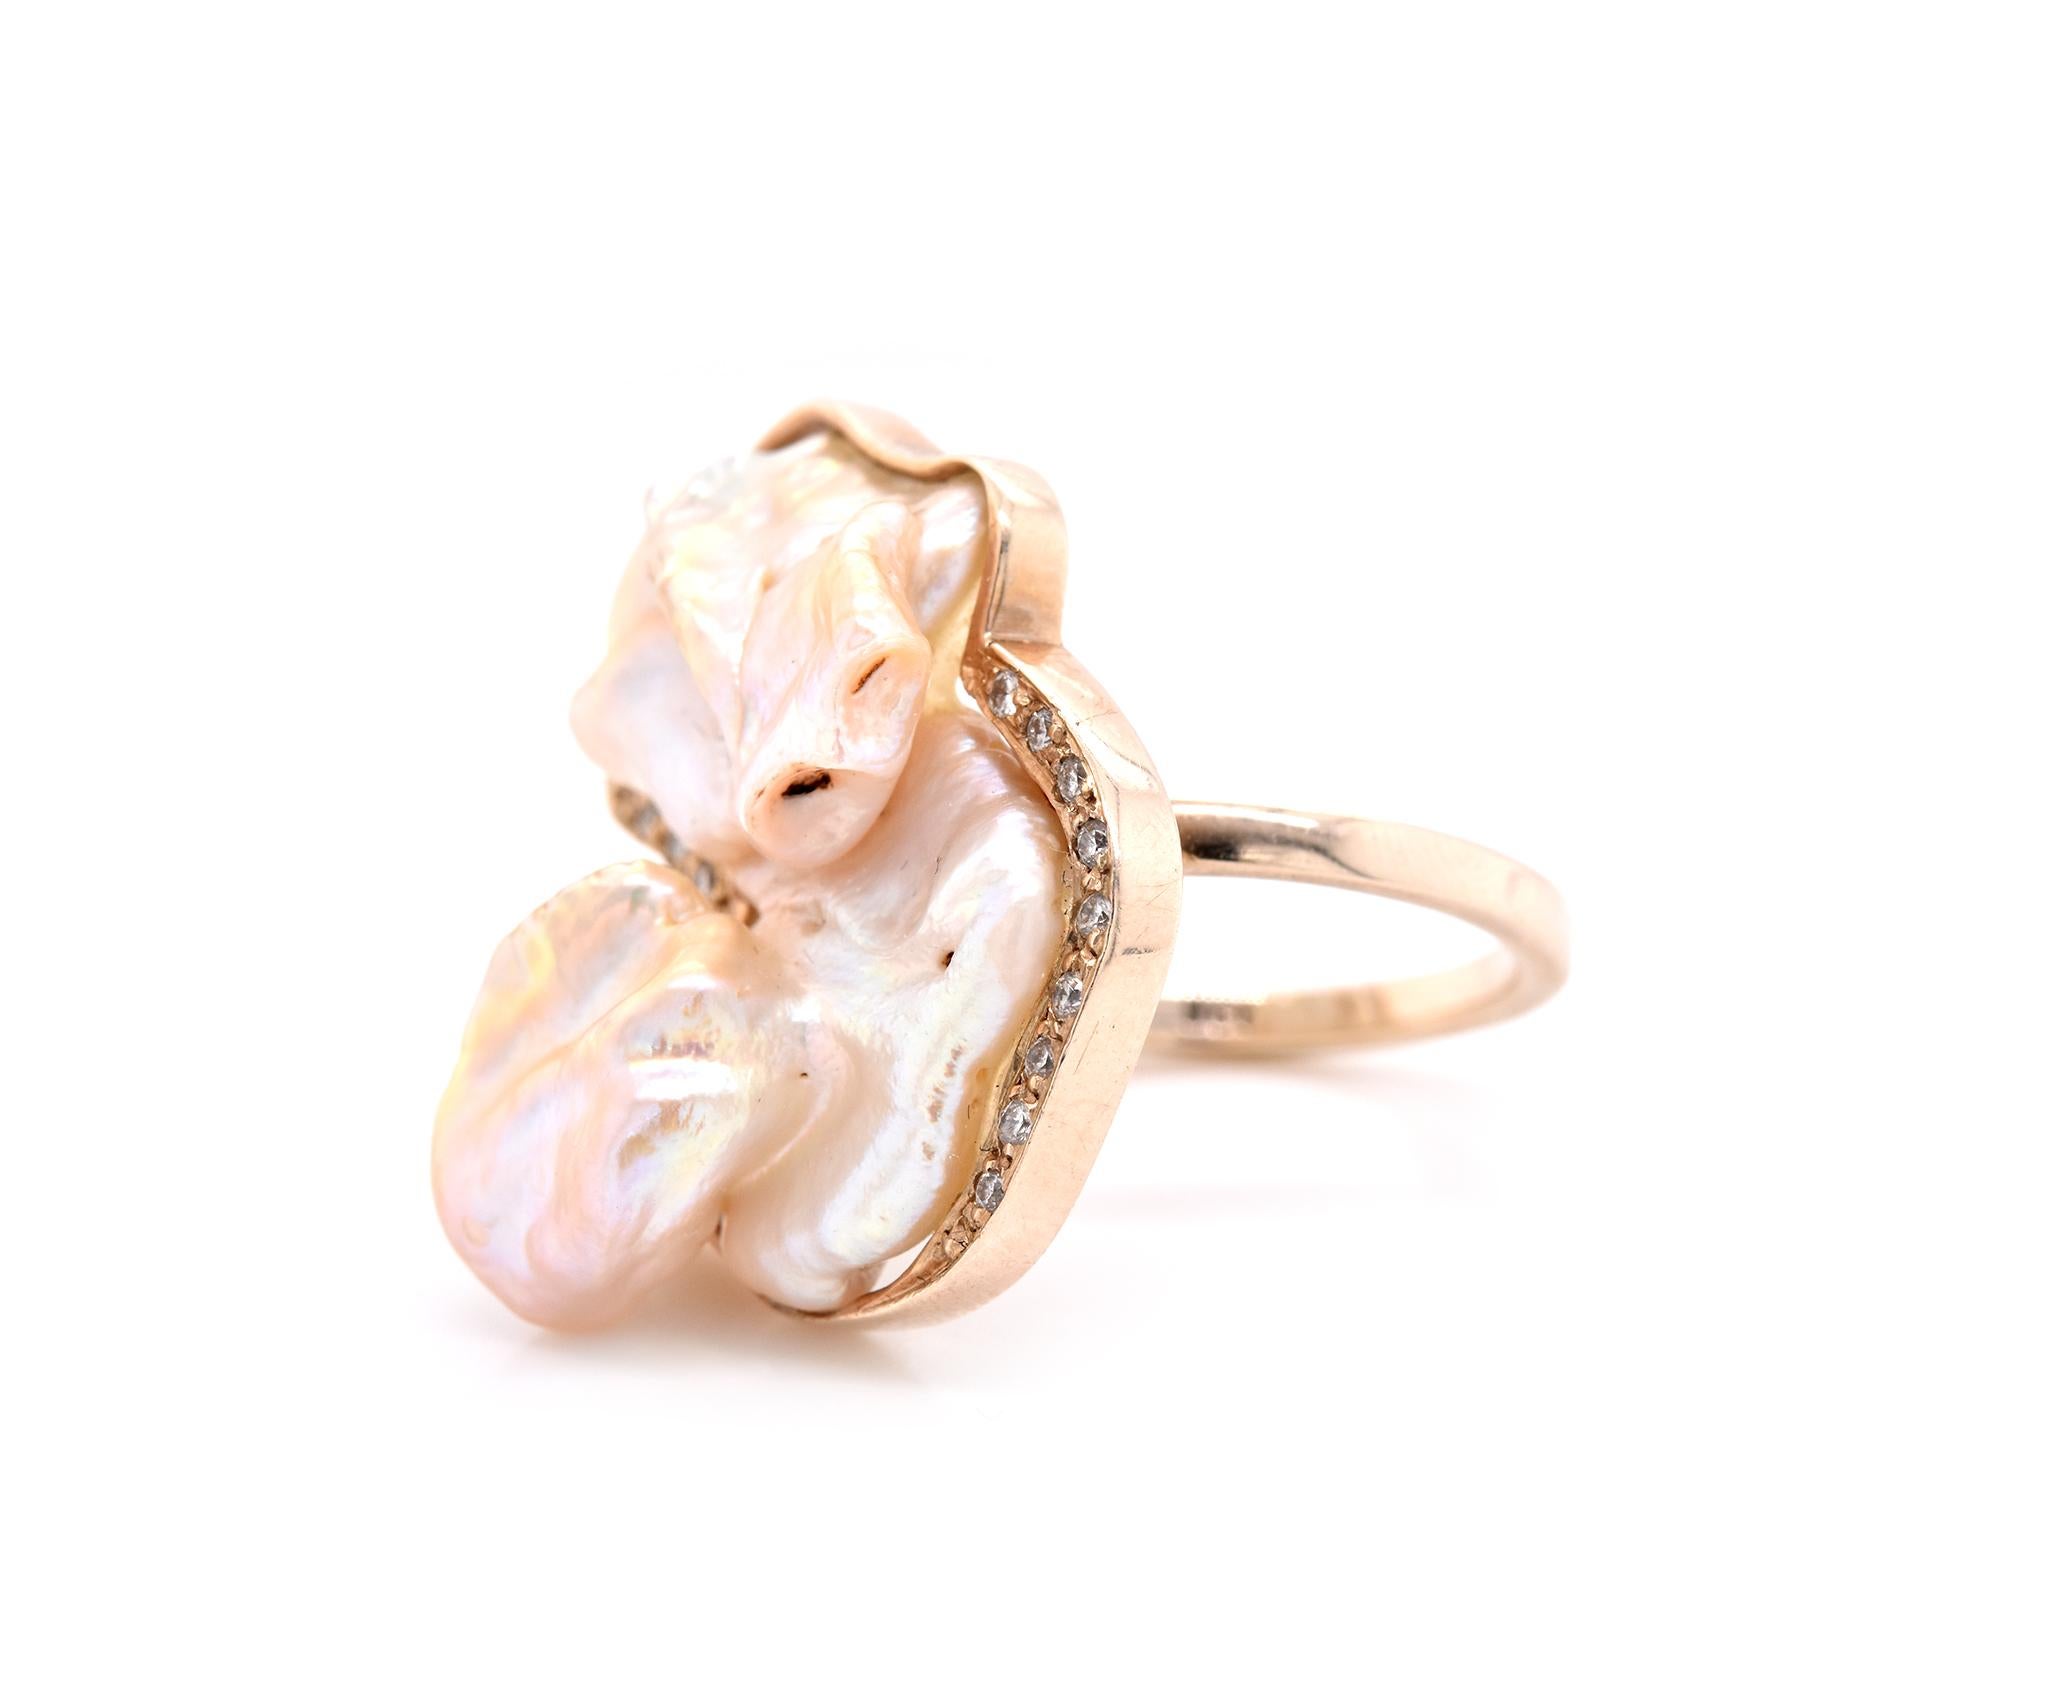 Material: 9k yellow gold
Pearl: 1 free form mother of pearl
Diamonds: 19 round brilliant cut = .60cttw 
Color: H
Clarity: SI1
Ring Size: 7.75 (please allow two additional shipping days for sizing requests)
Dimensions: ring measures 27.22 X